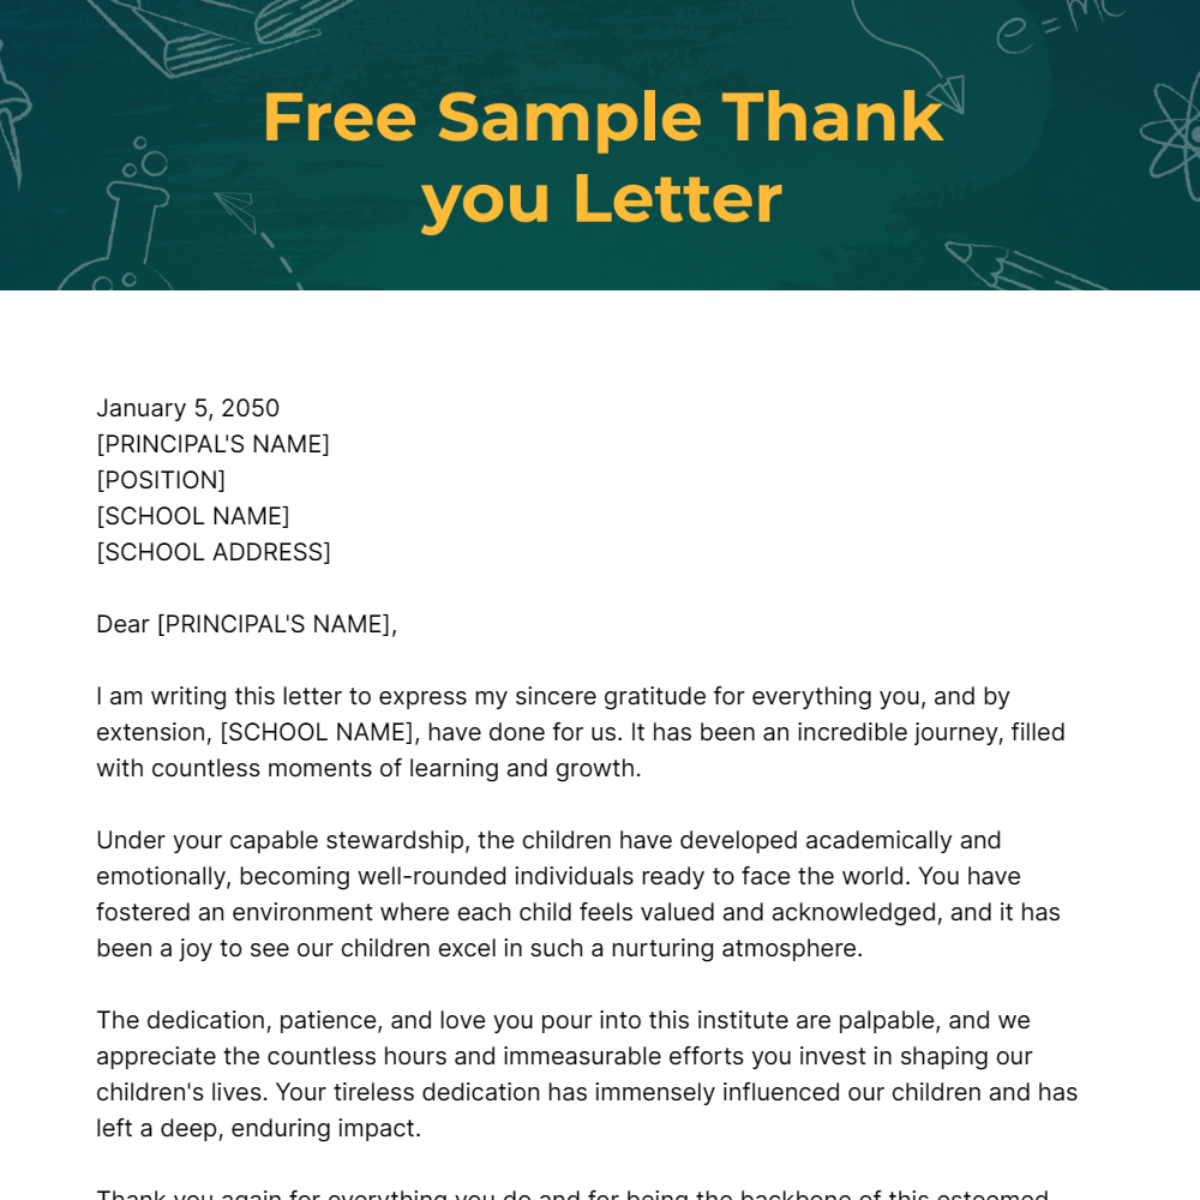 Sample Thank you Letter Template